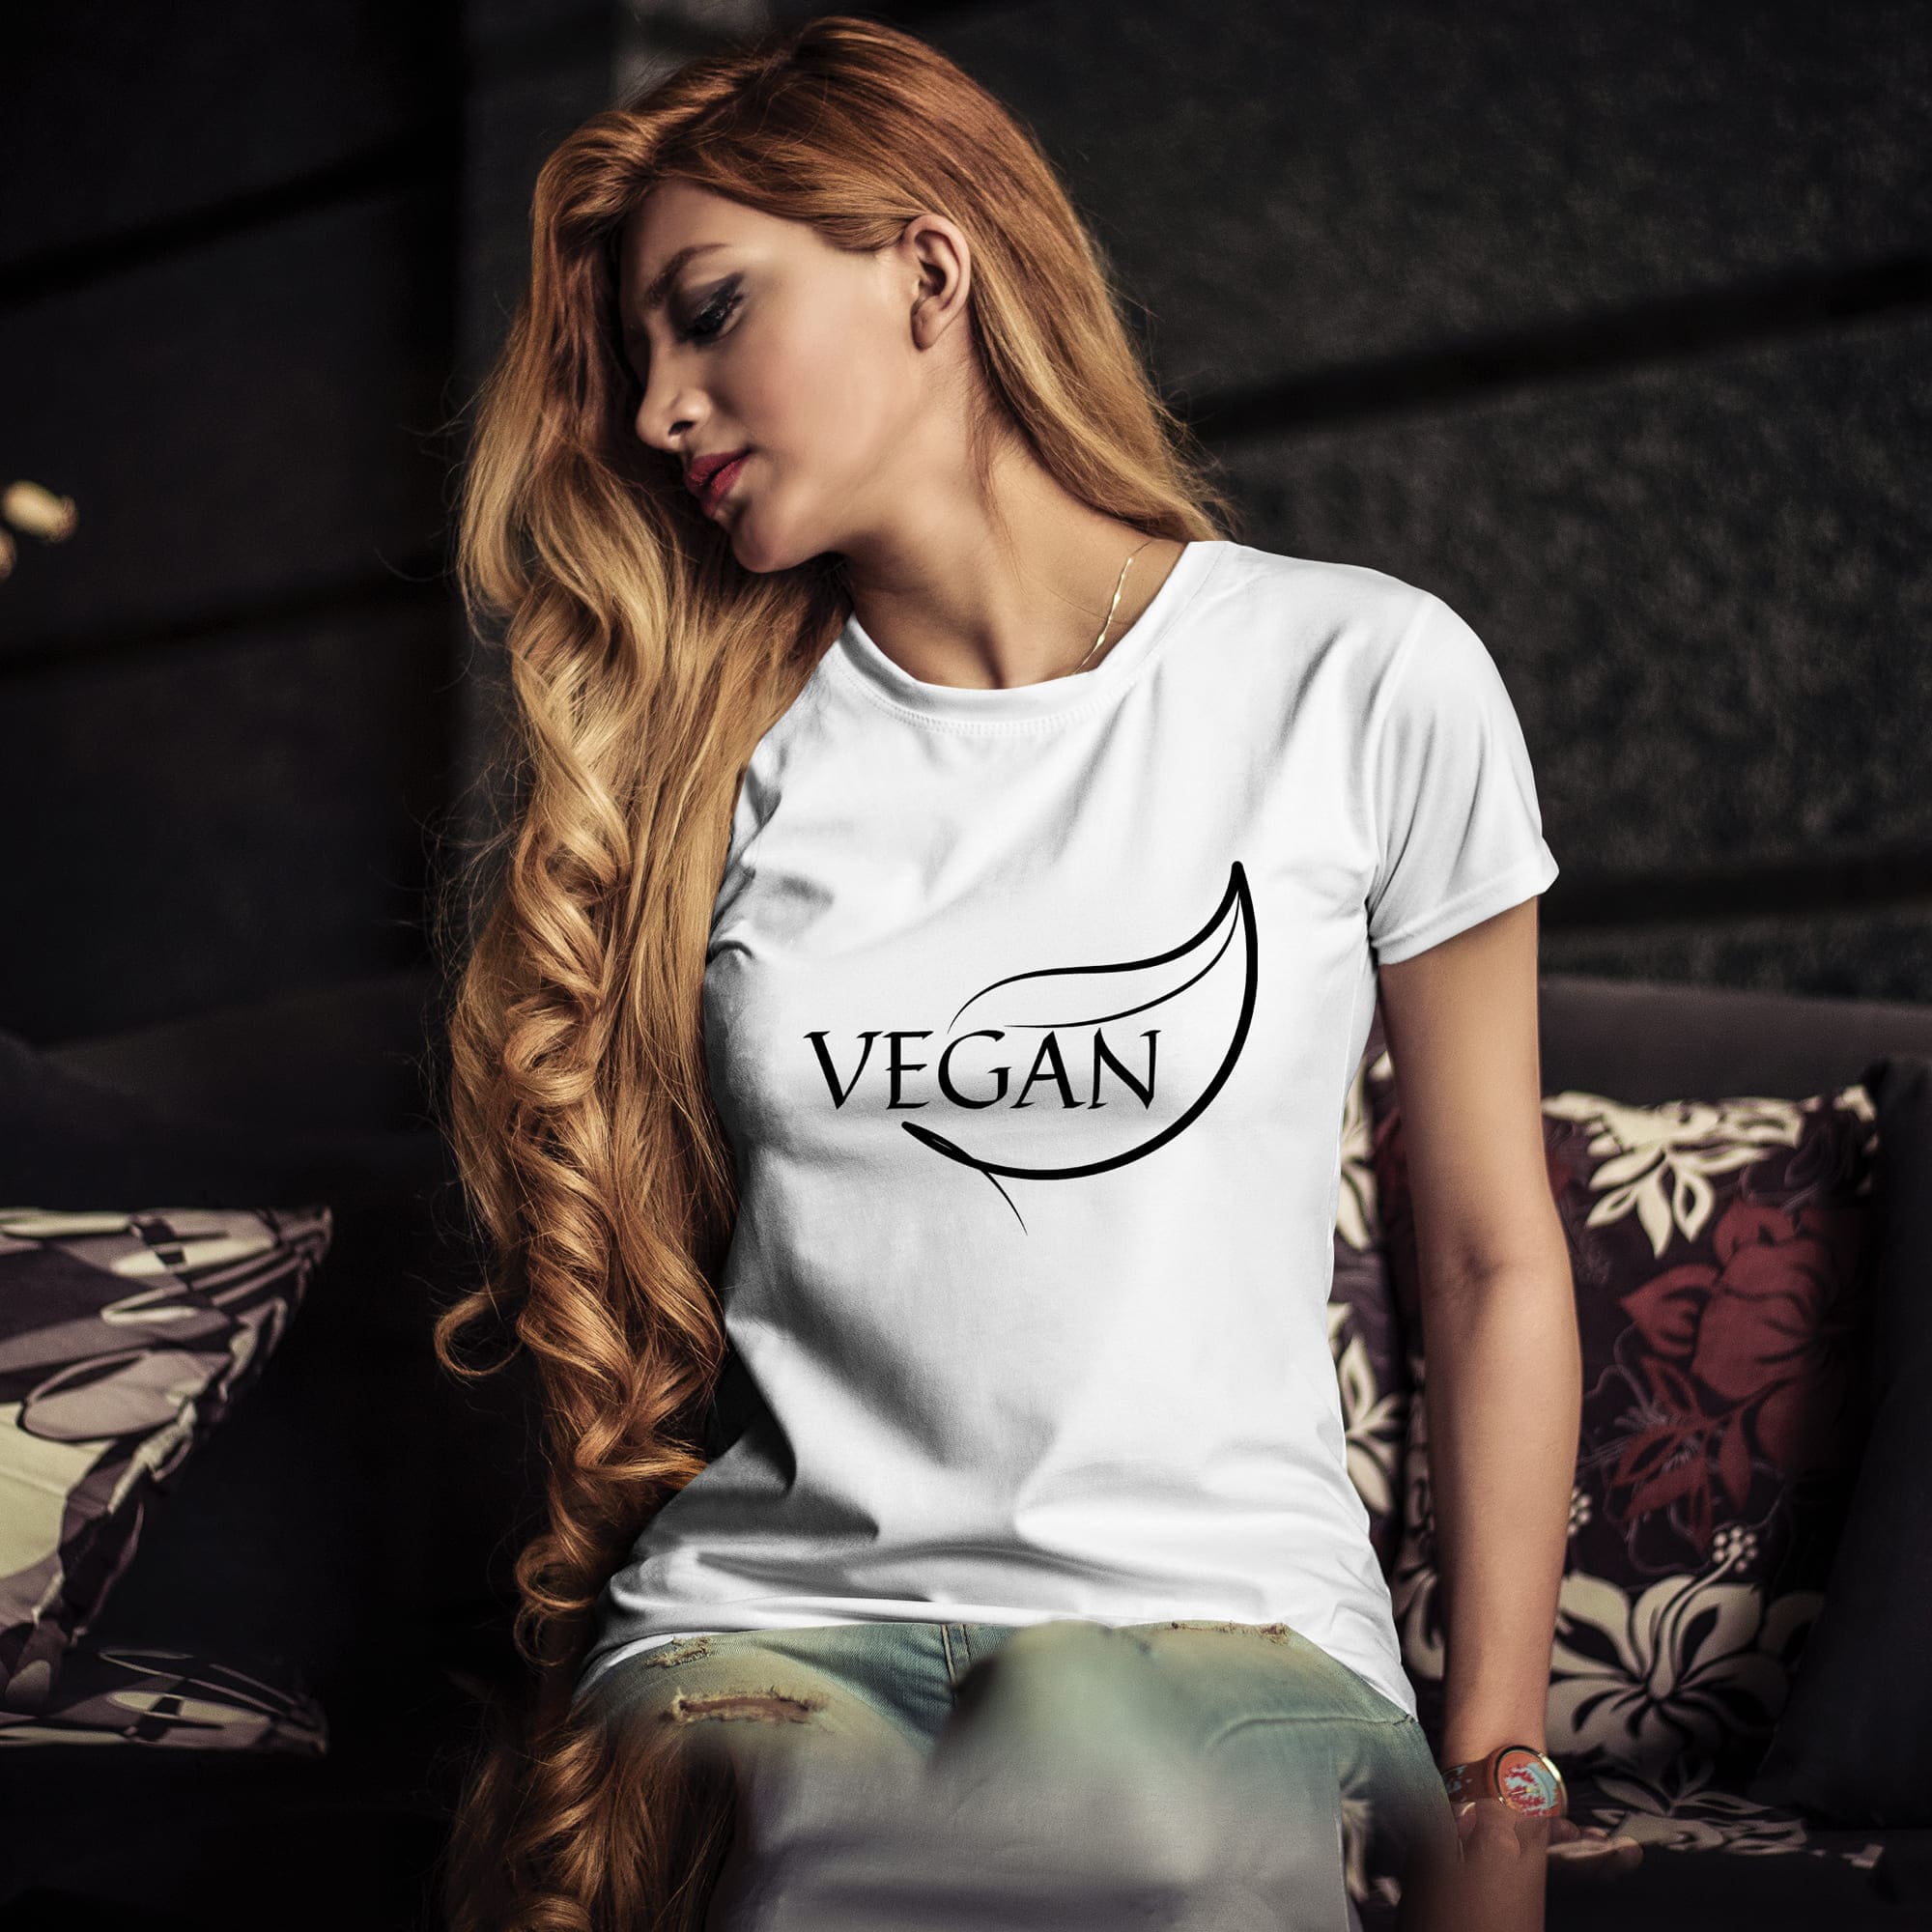 The word vegan is painted on a girl's T-shirt.